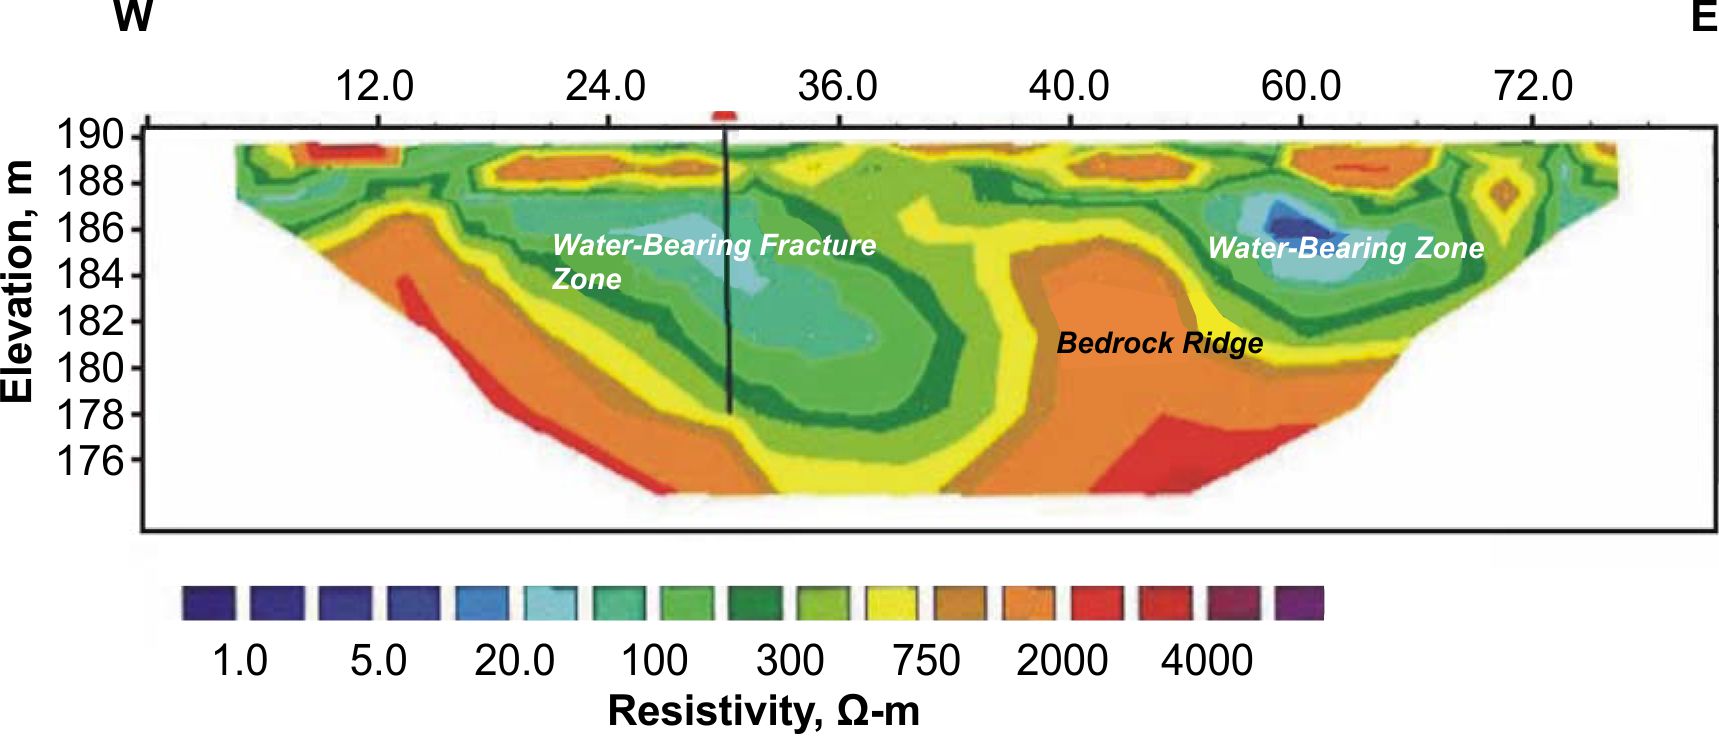 Resistivity data over a fracture zone.